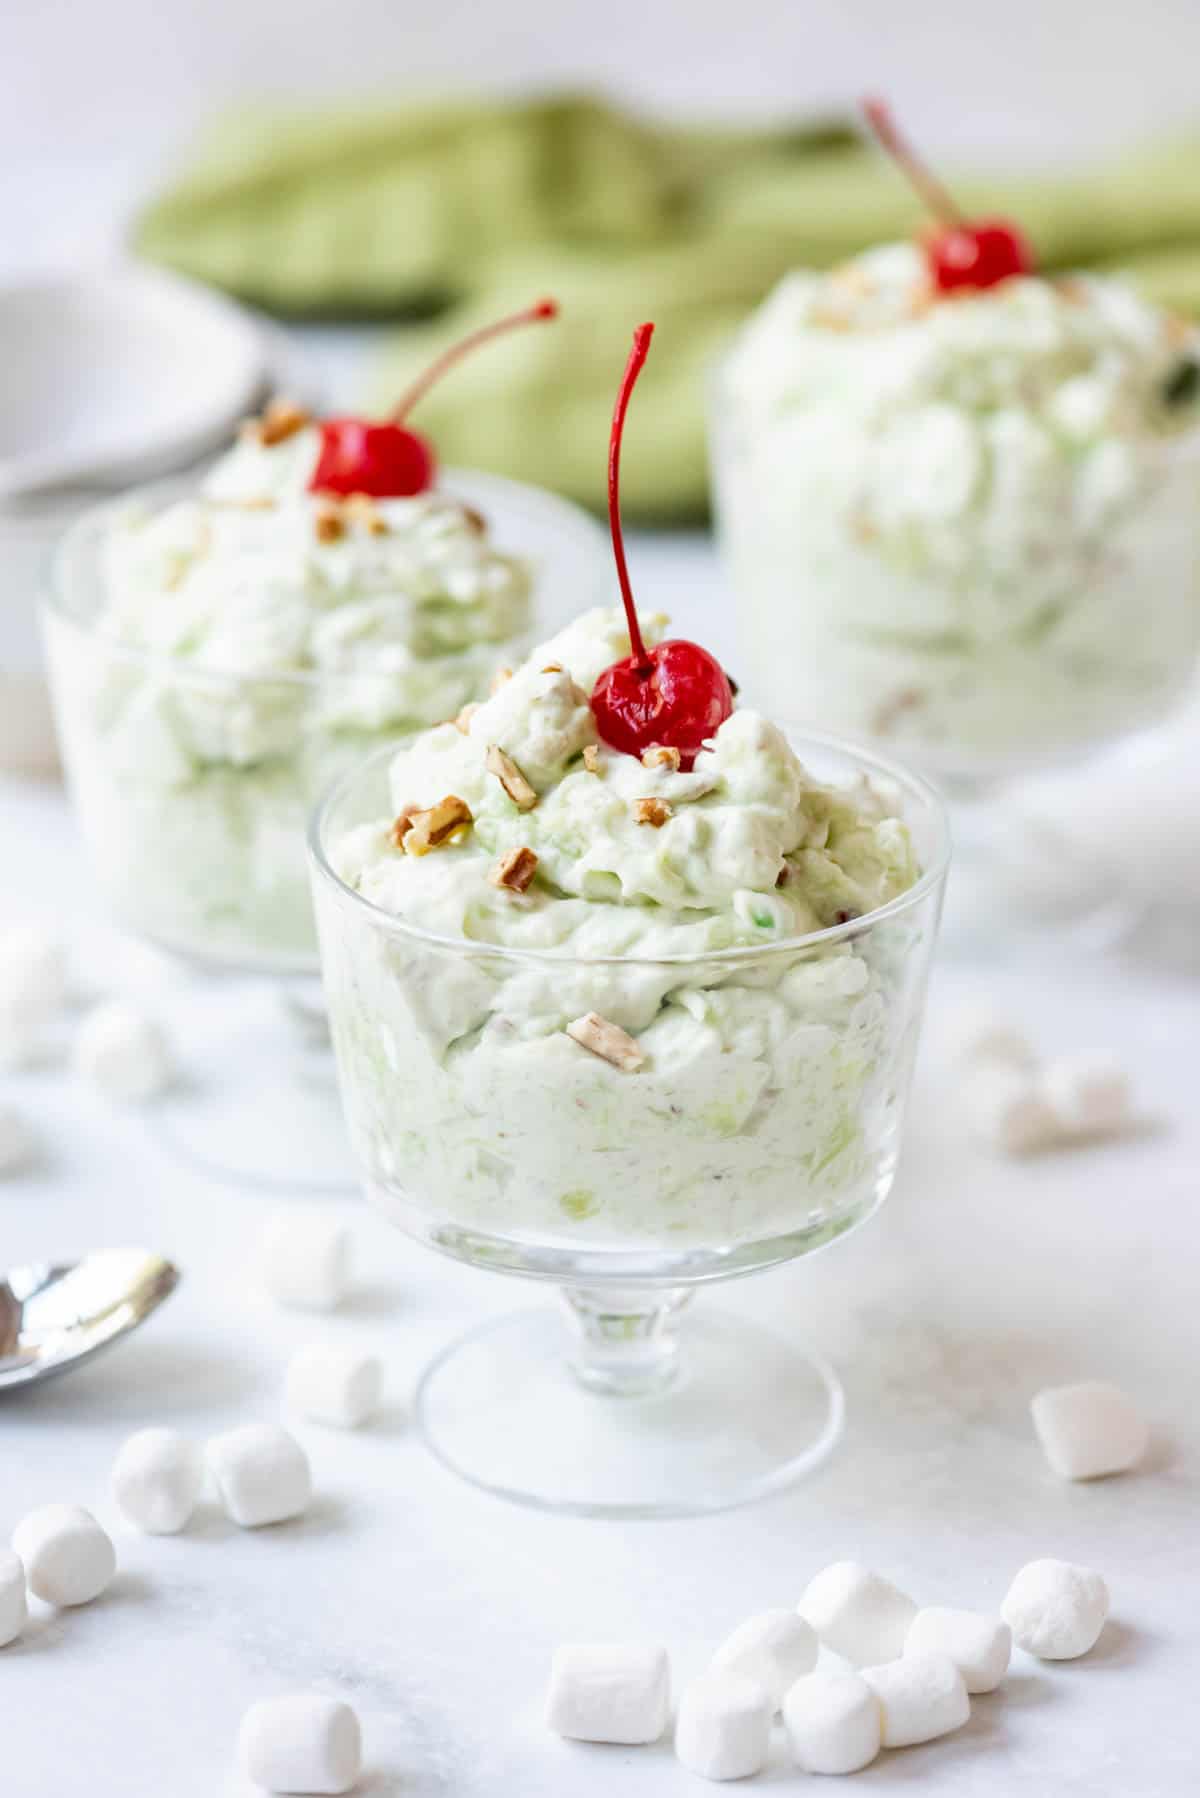 Three glass bowls of watergate salad decorated with a maraschino cherry on top.